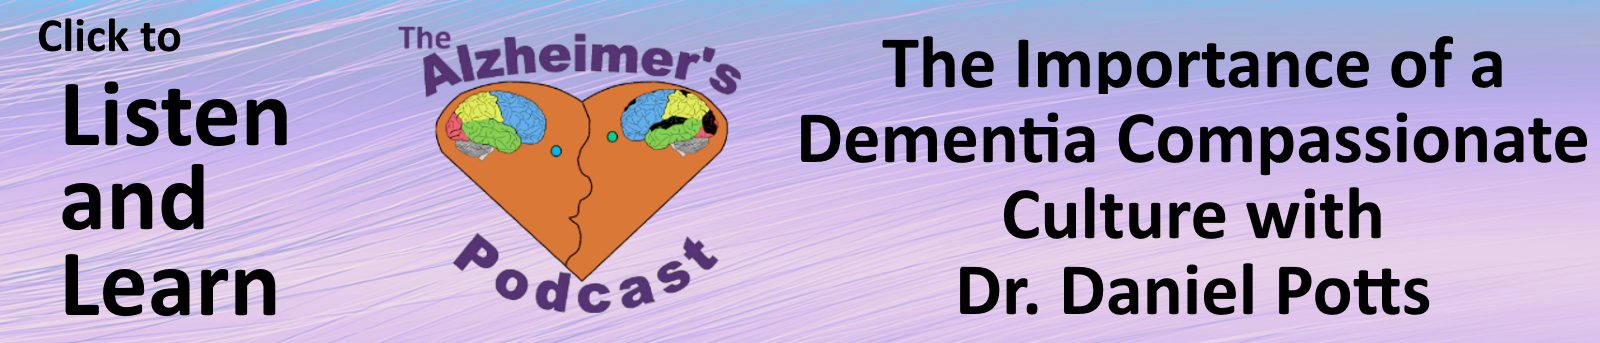 Advertisement for The Alzheimer's Podcast Episode 20 with Dr. Daniel Potts